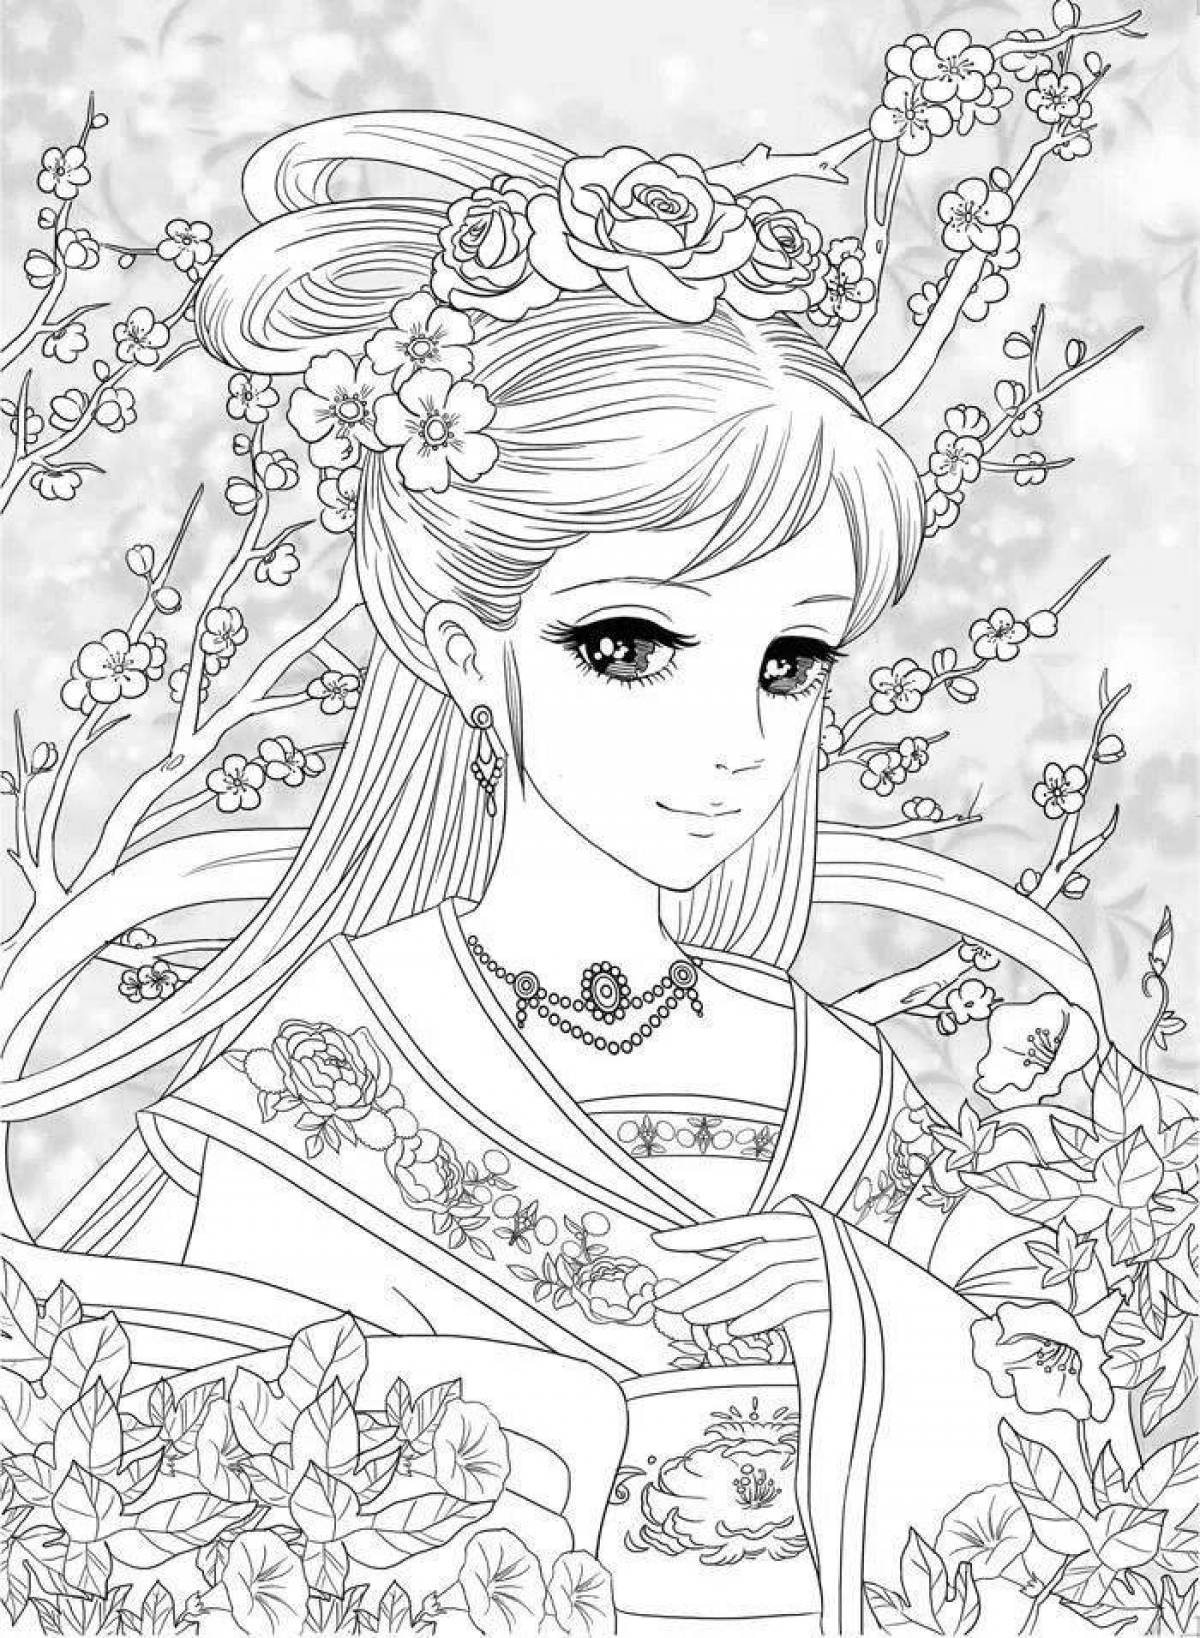 Color-frenzy coloring page for girls 20 years old